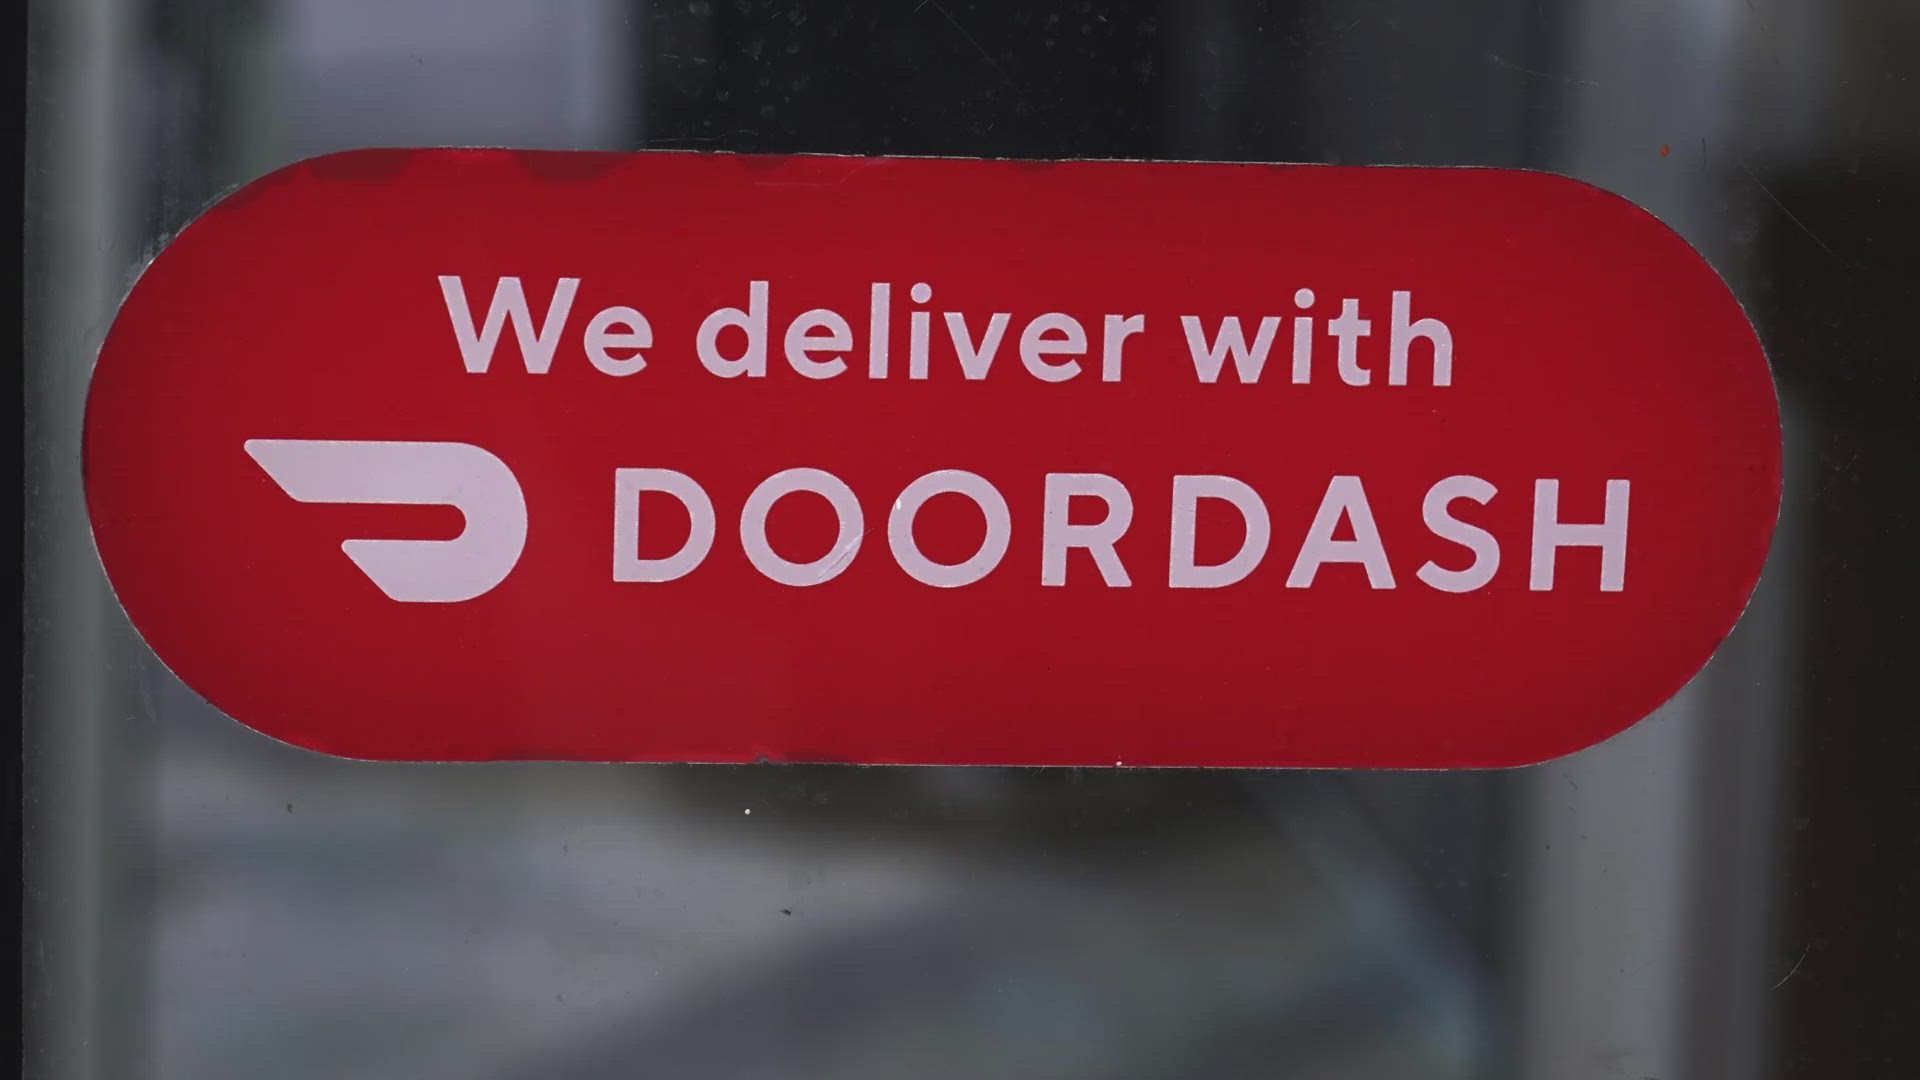 A delivery driver for the online food ordering company DoorDash was arrested and charged Wednesday. Police say he barged into a customer's apartment.